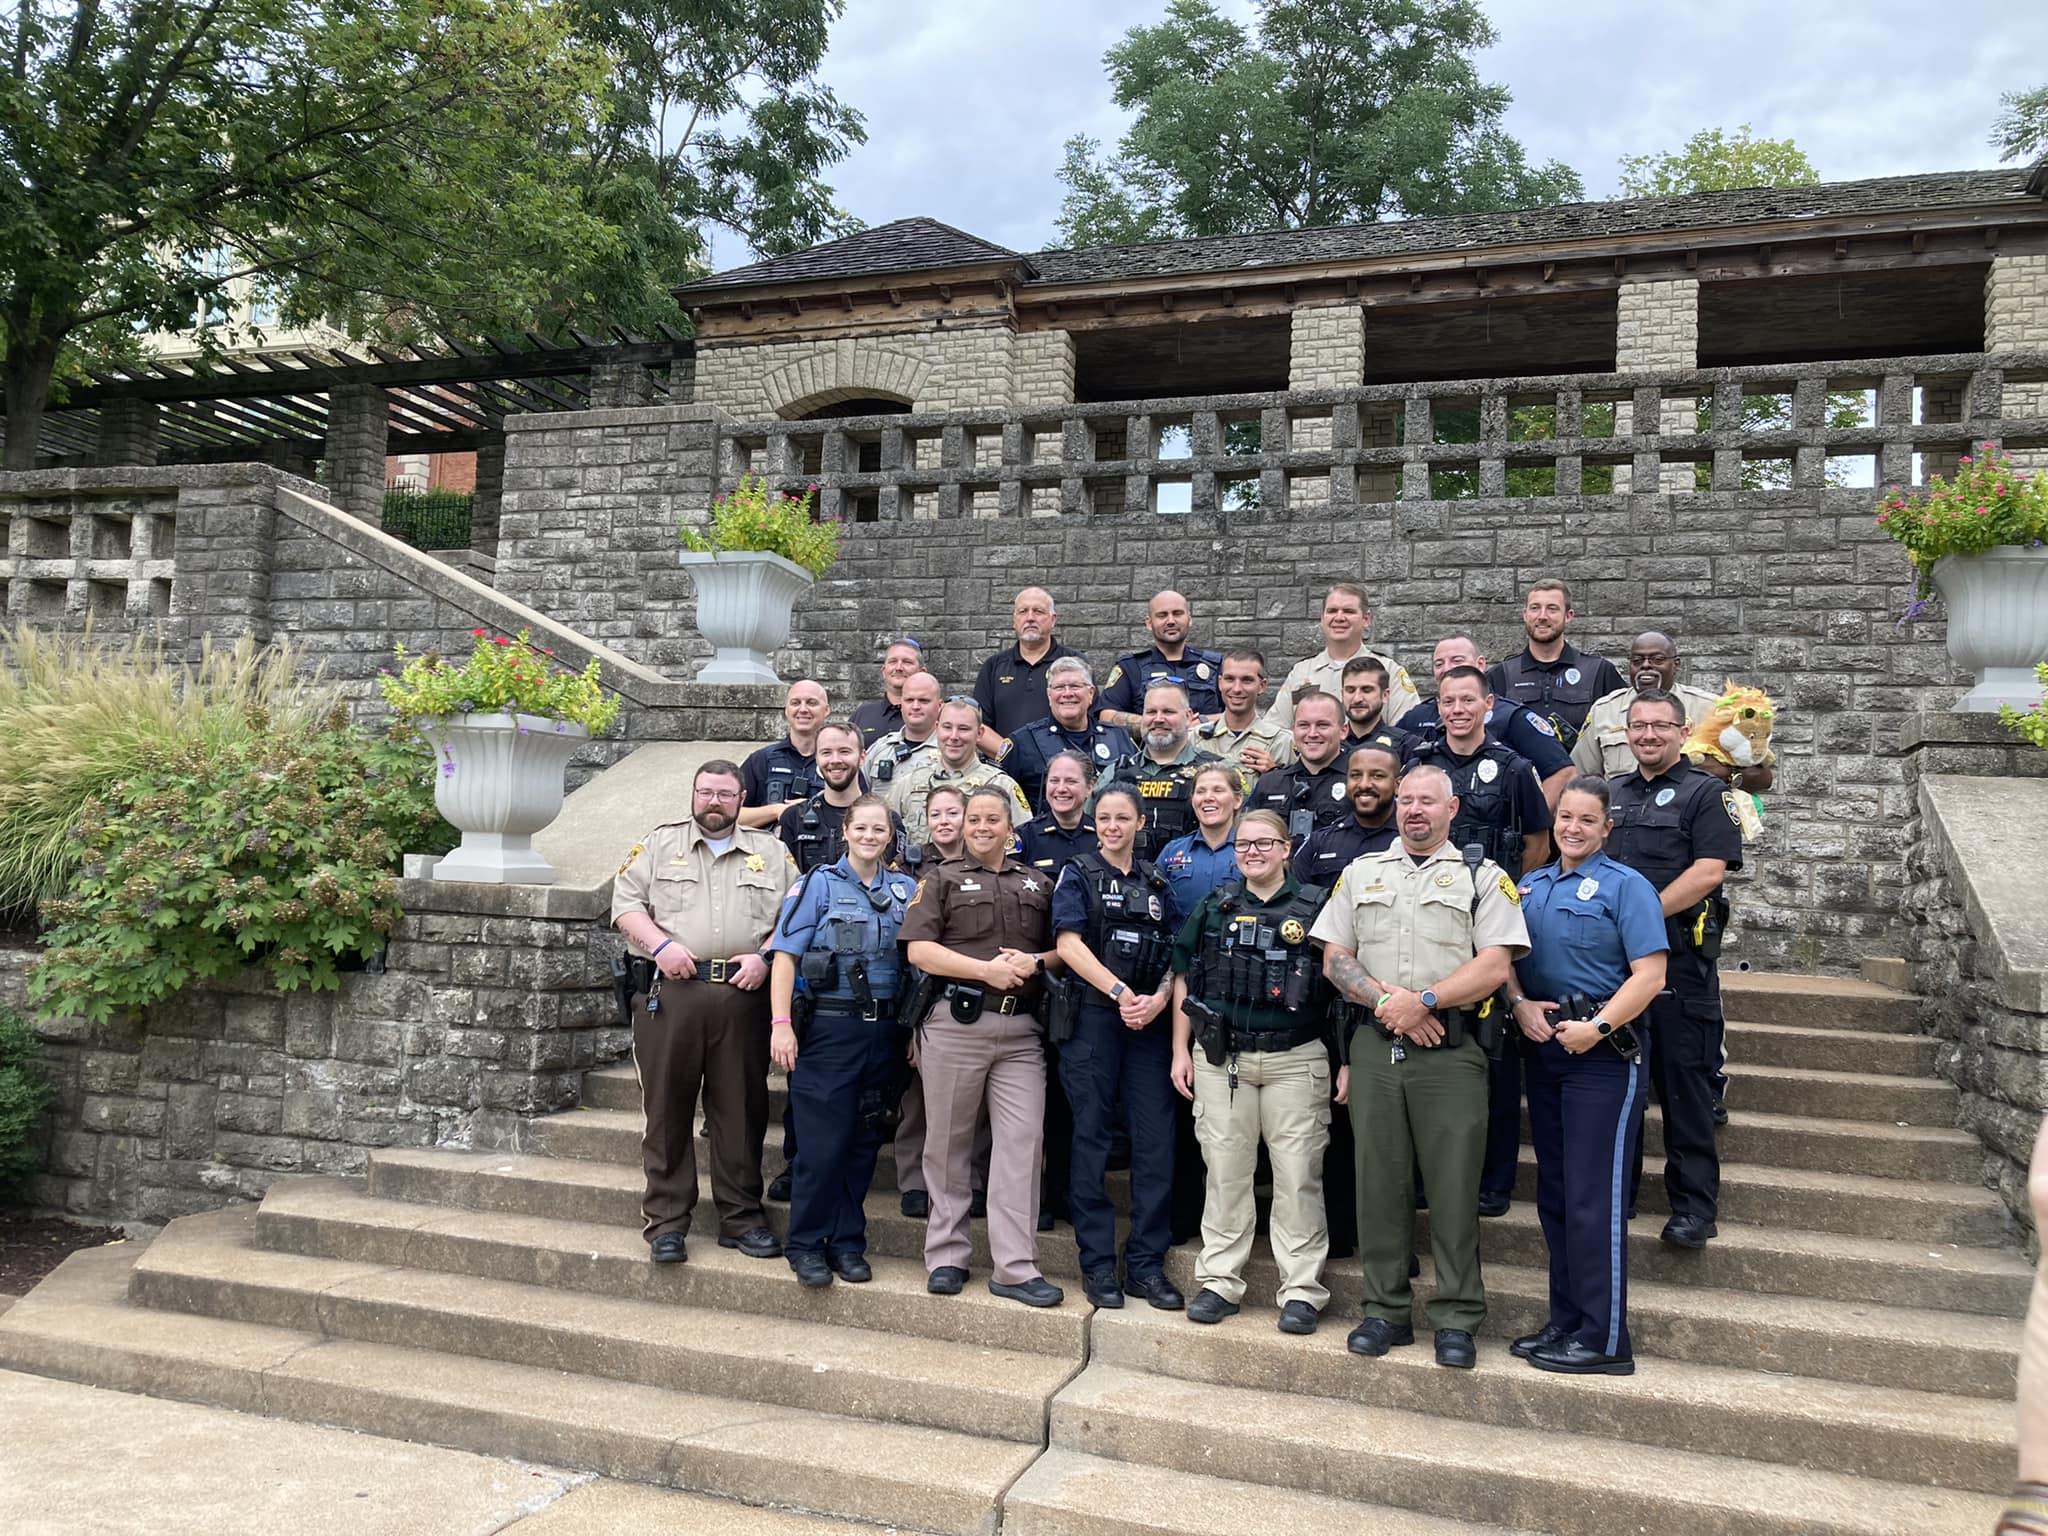 Class Photo from the D.A.R.E. Officer Training held on September 13 – 25, 2020 in Jefferson City, MO